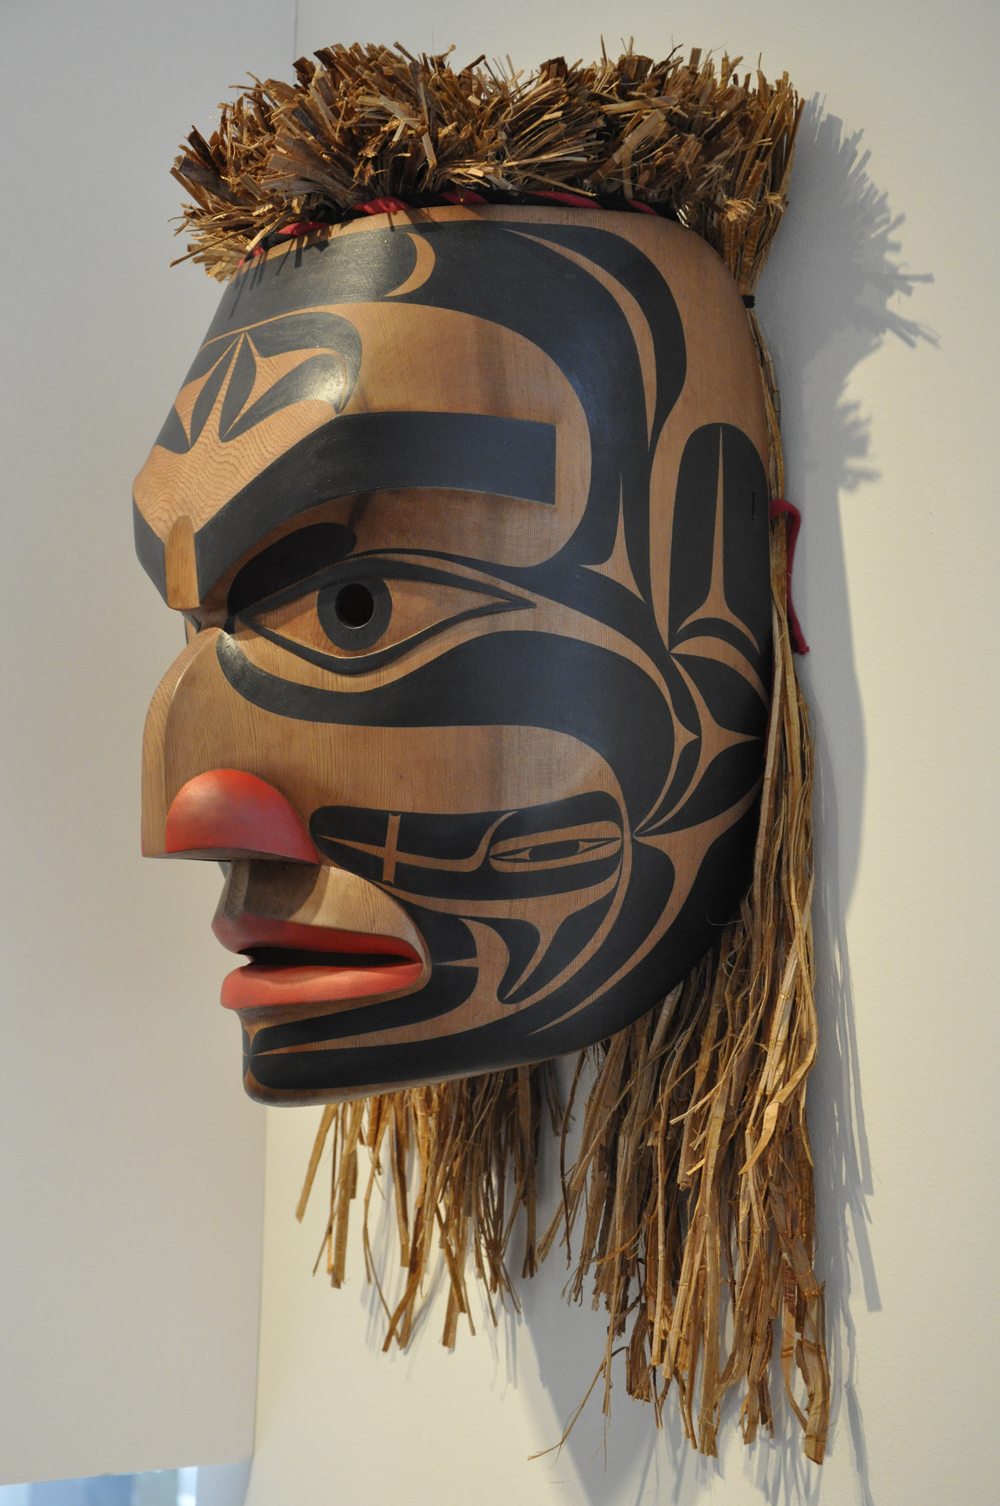 Commissioned Whaler Mask by Greg Colfax.